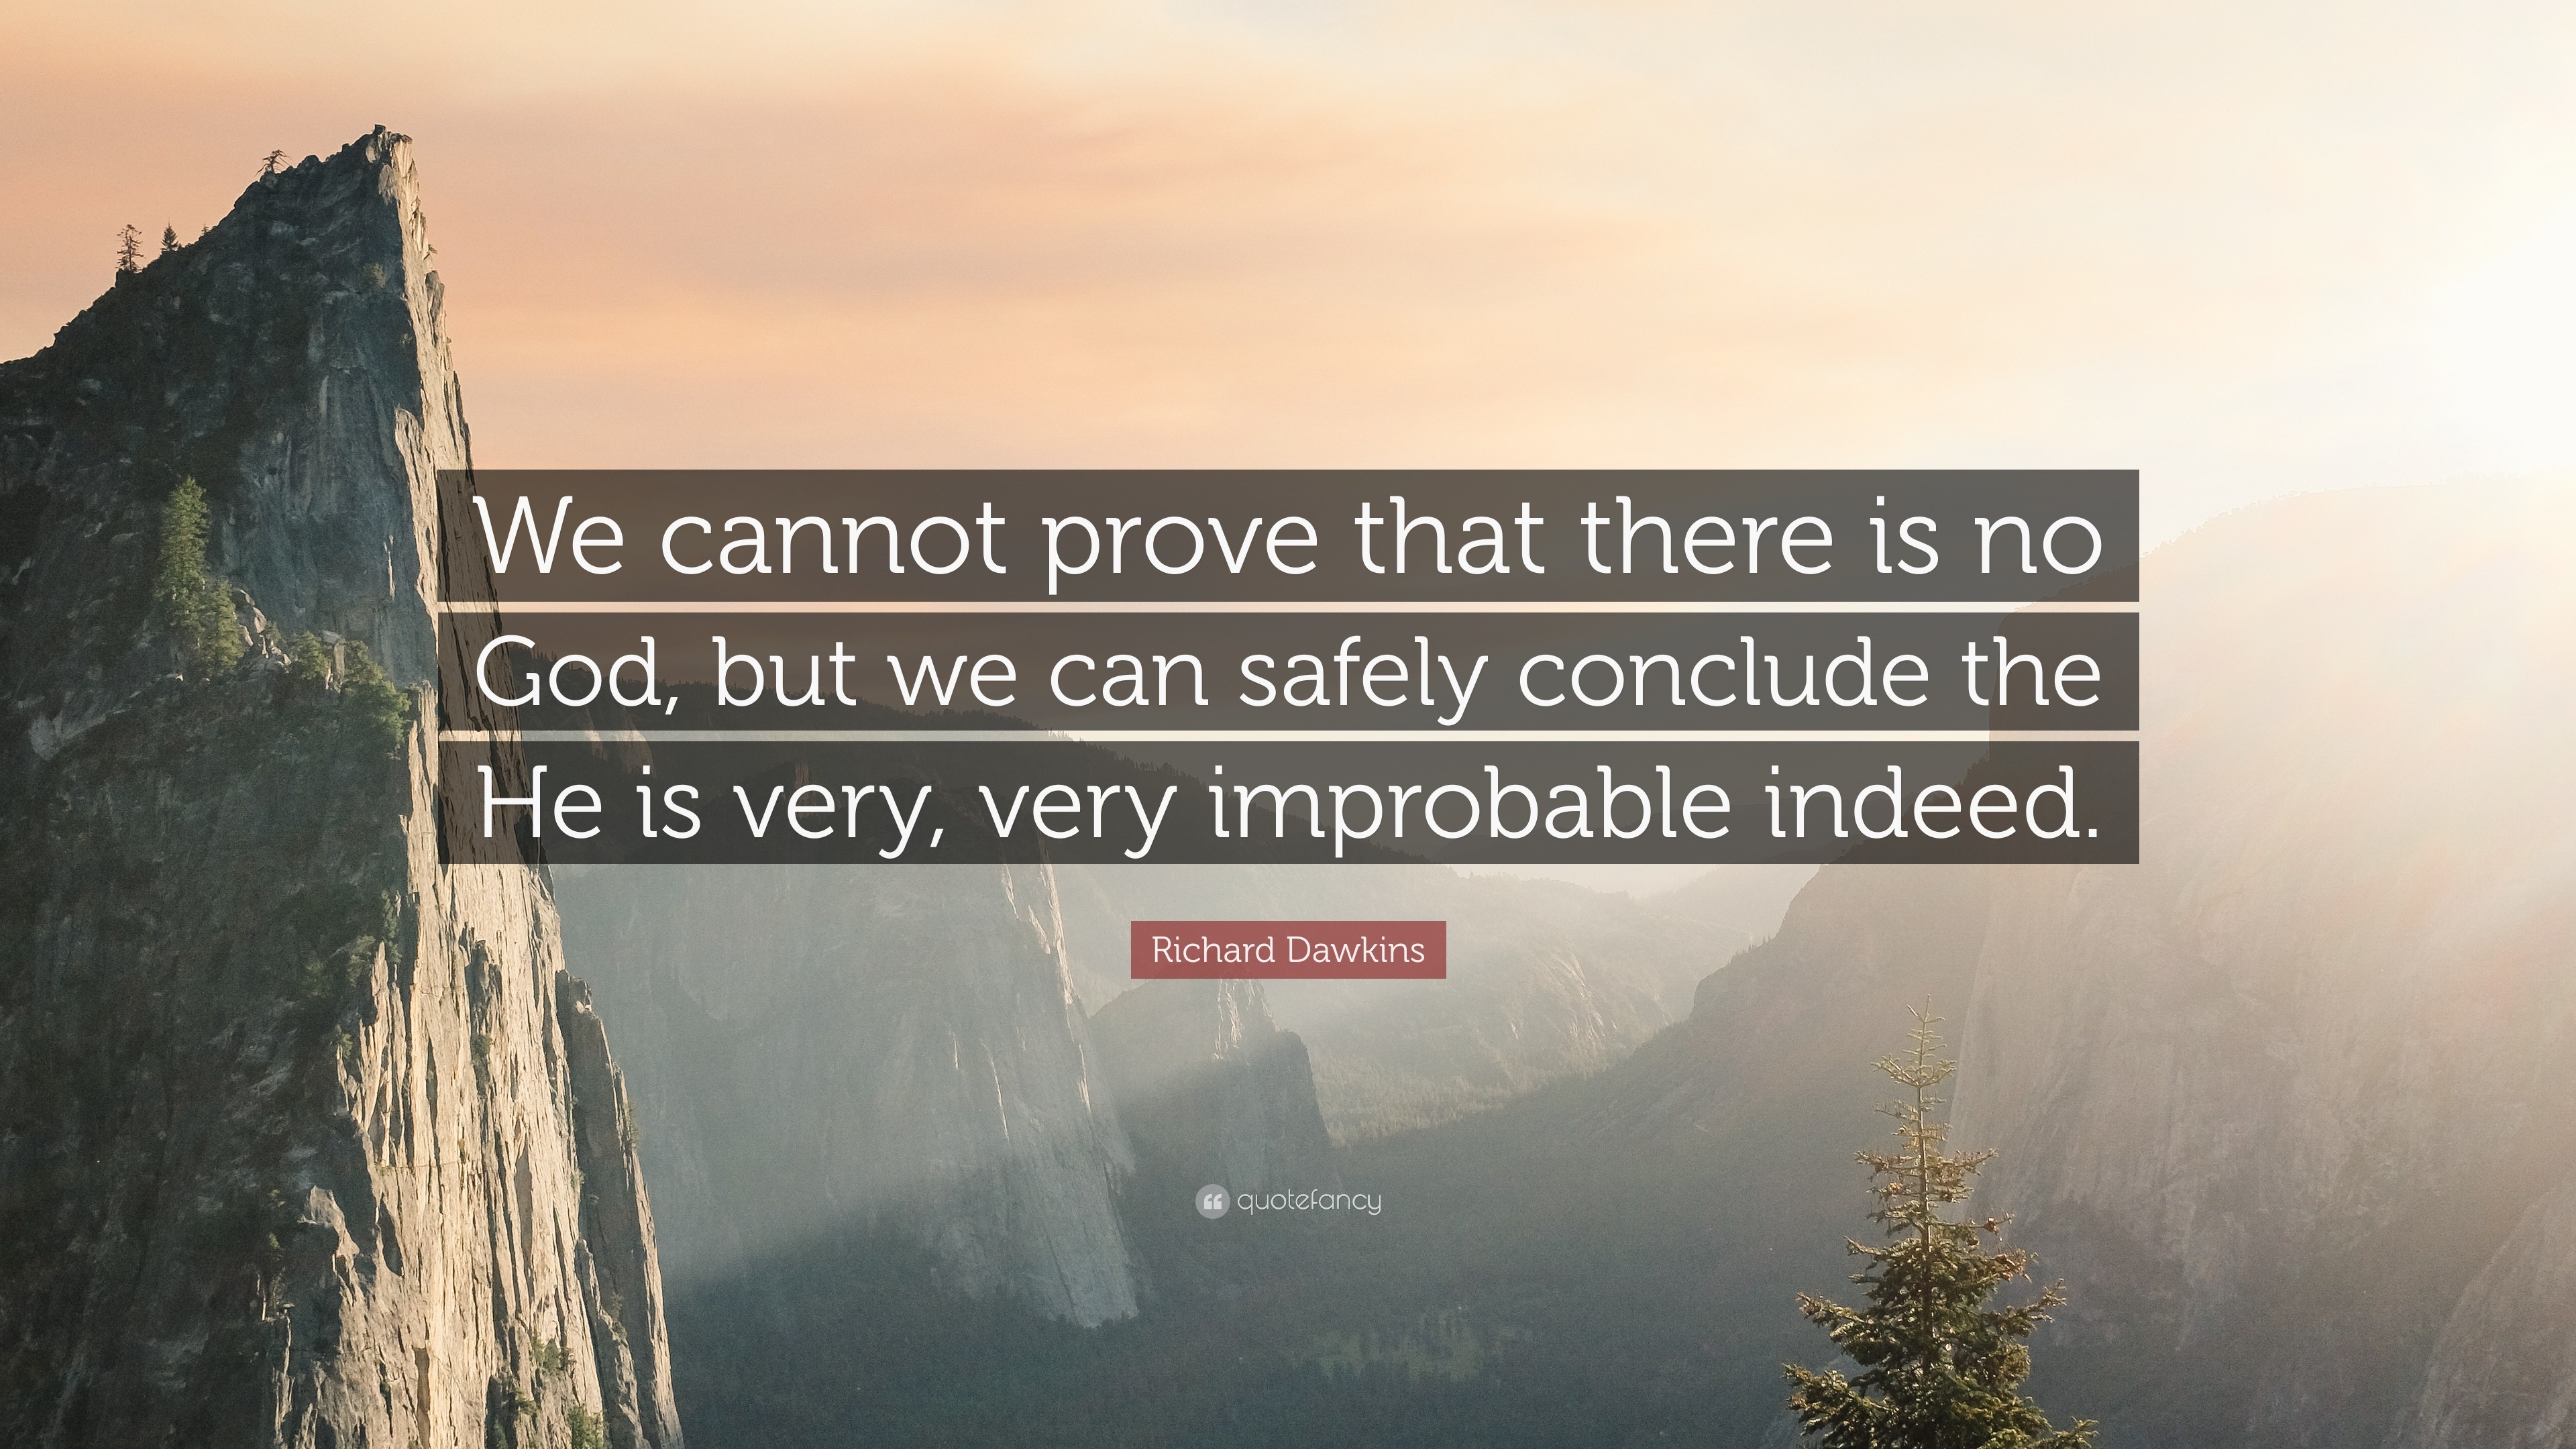 Richard Dawkins Quote We Cannot Prove That There Is No God But We Can Safely Conclude